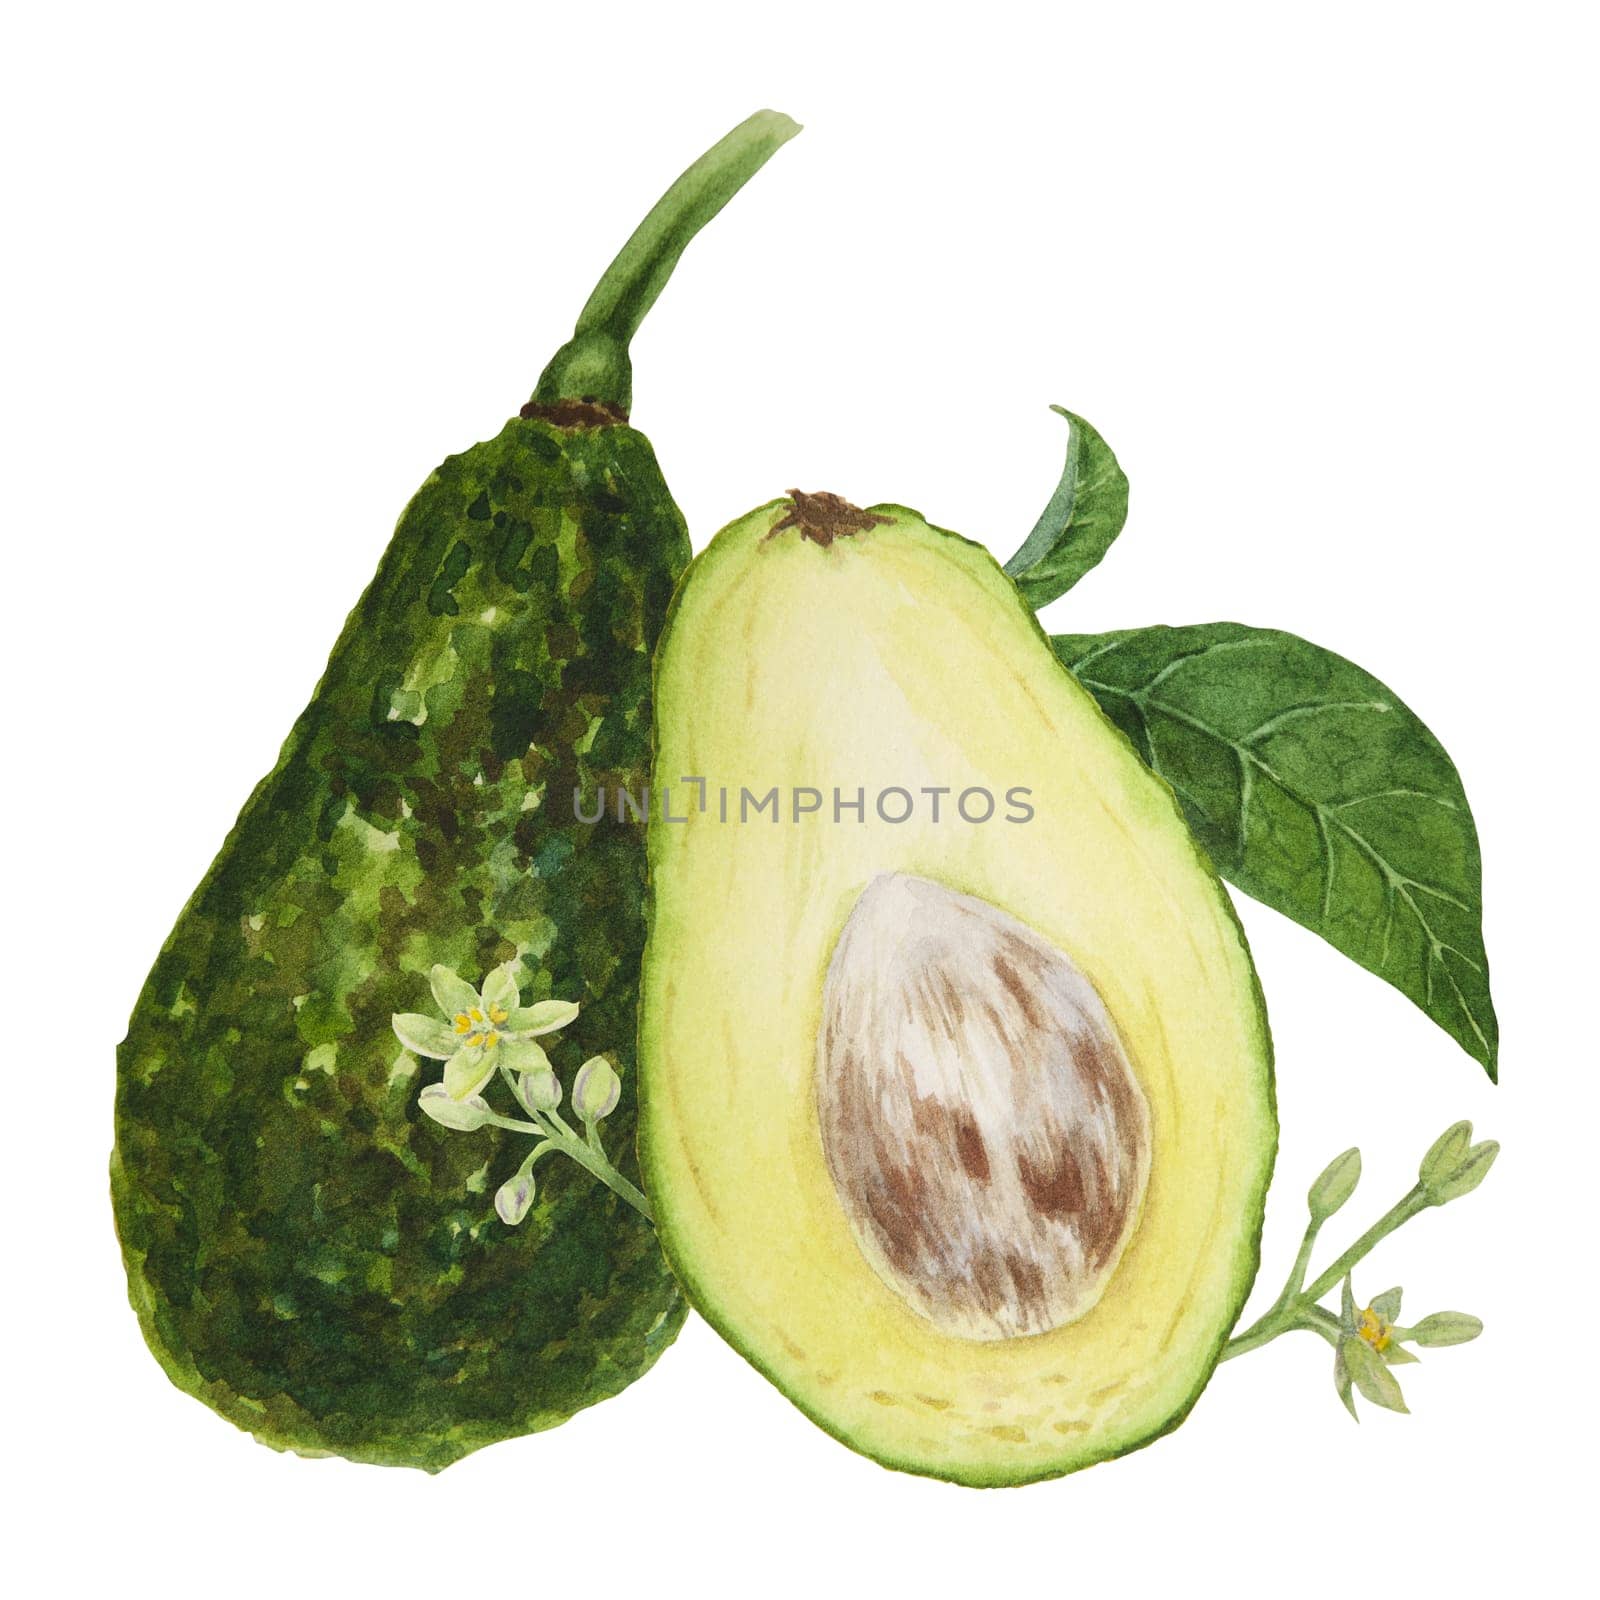 Avocado pieces with leaves and flowers watercolor hand drawn realistic illustration. Green and fresh art of salad, sauce, guacamole, smoothie ingredient. For textile, menu, cards, paper, package, cooking books design